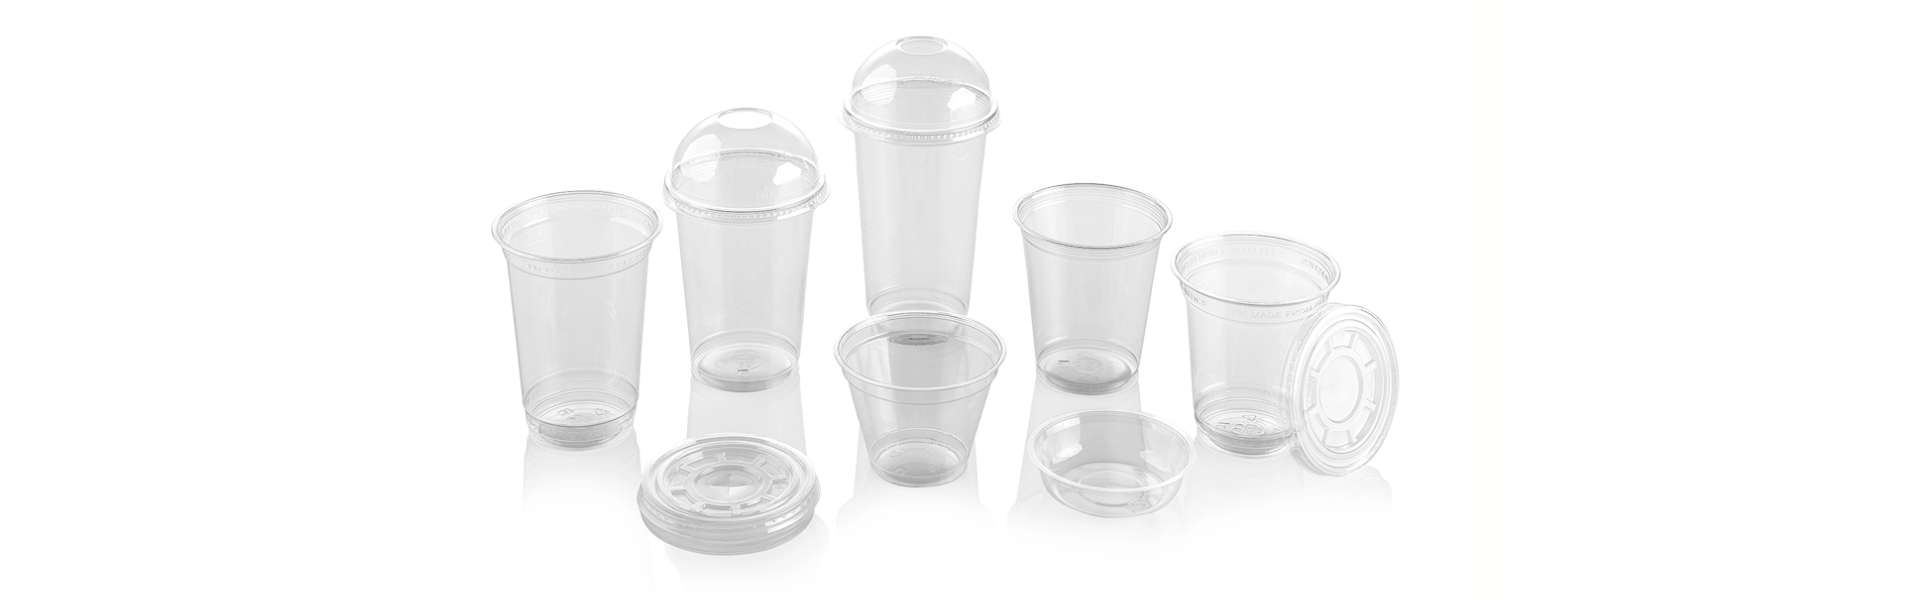 Faerch launches new circular Tumbler range for the »to-go« beverage market